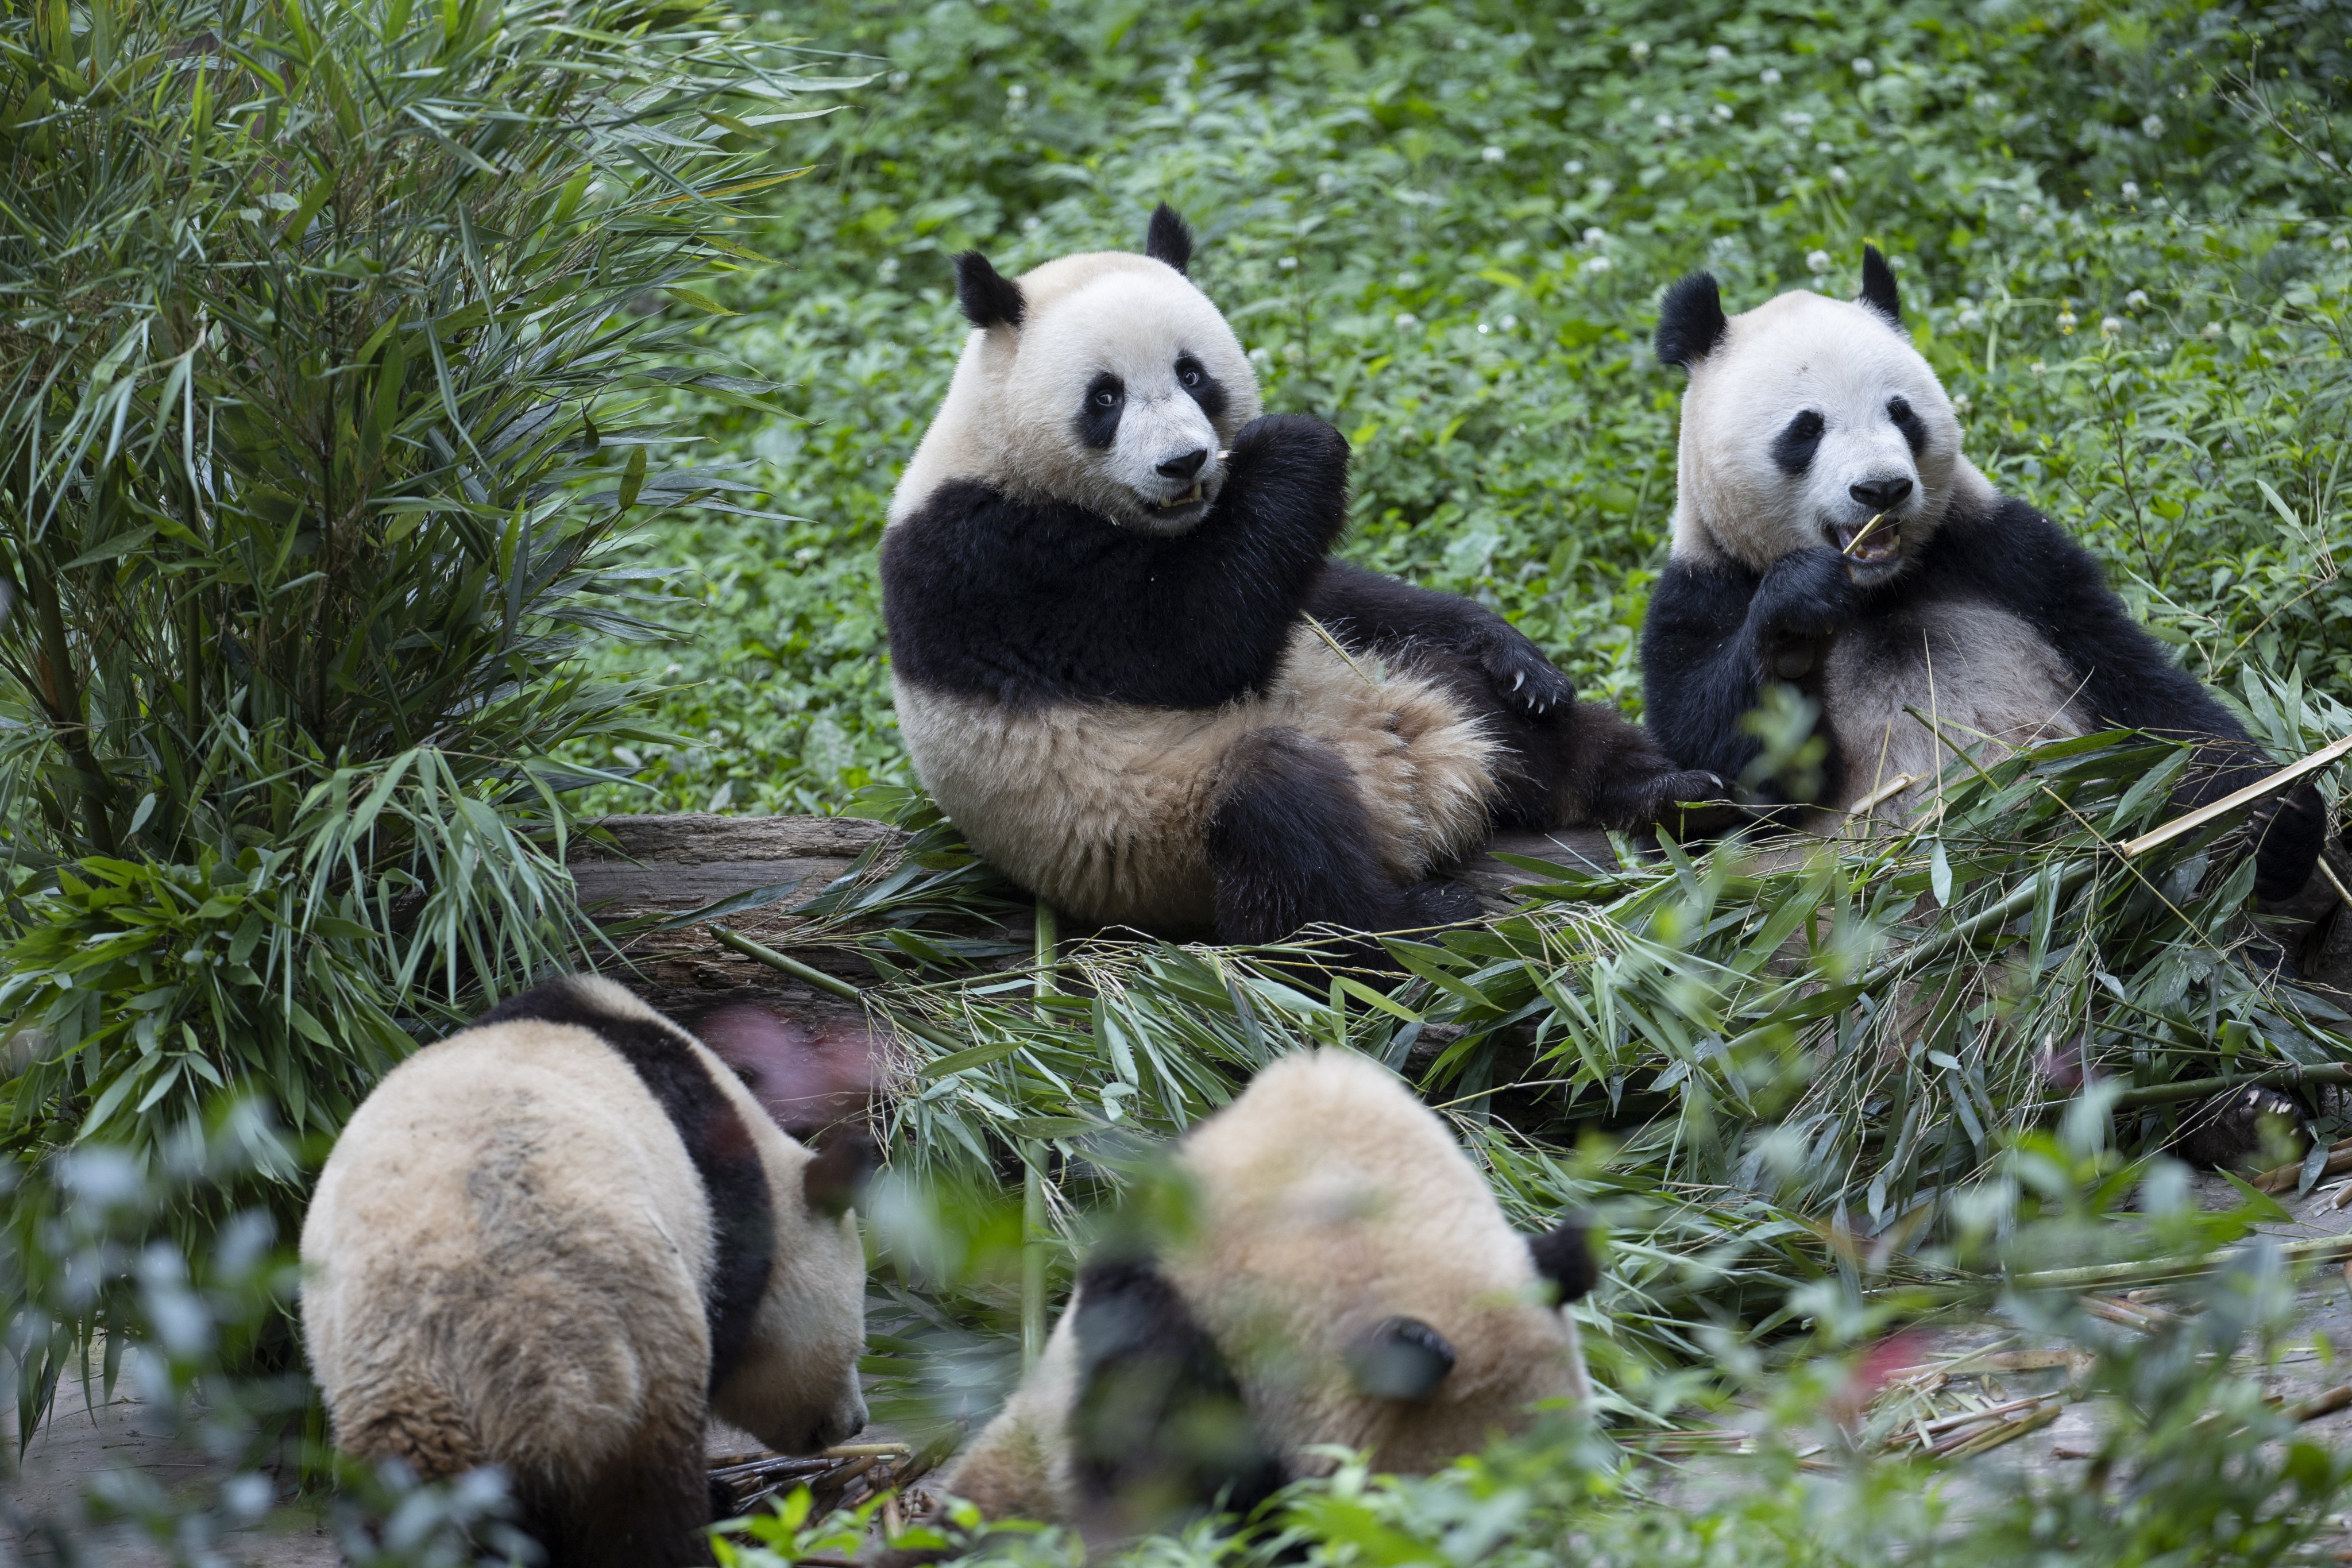 Giant pandas at the Bifengxia Giant Panda Base in Sichuan province, China. Two of the bears are en route to the San Diego Zoo in California. Photo: EPA-EFE